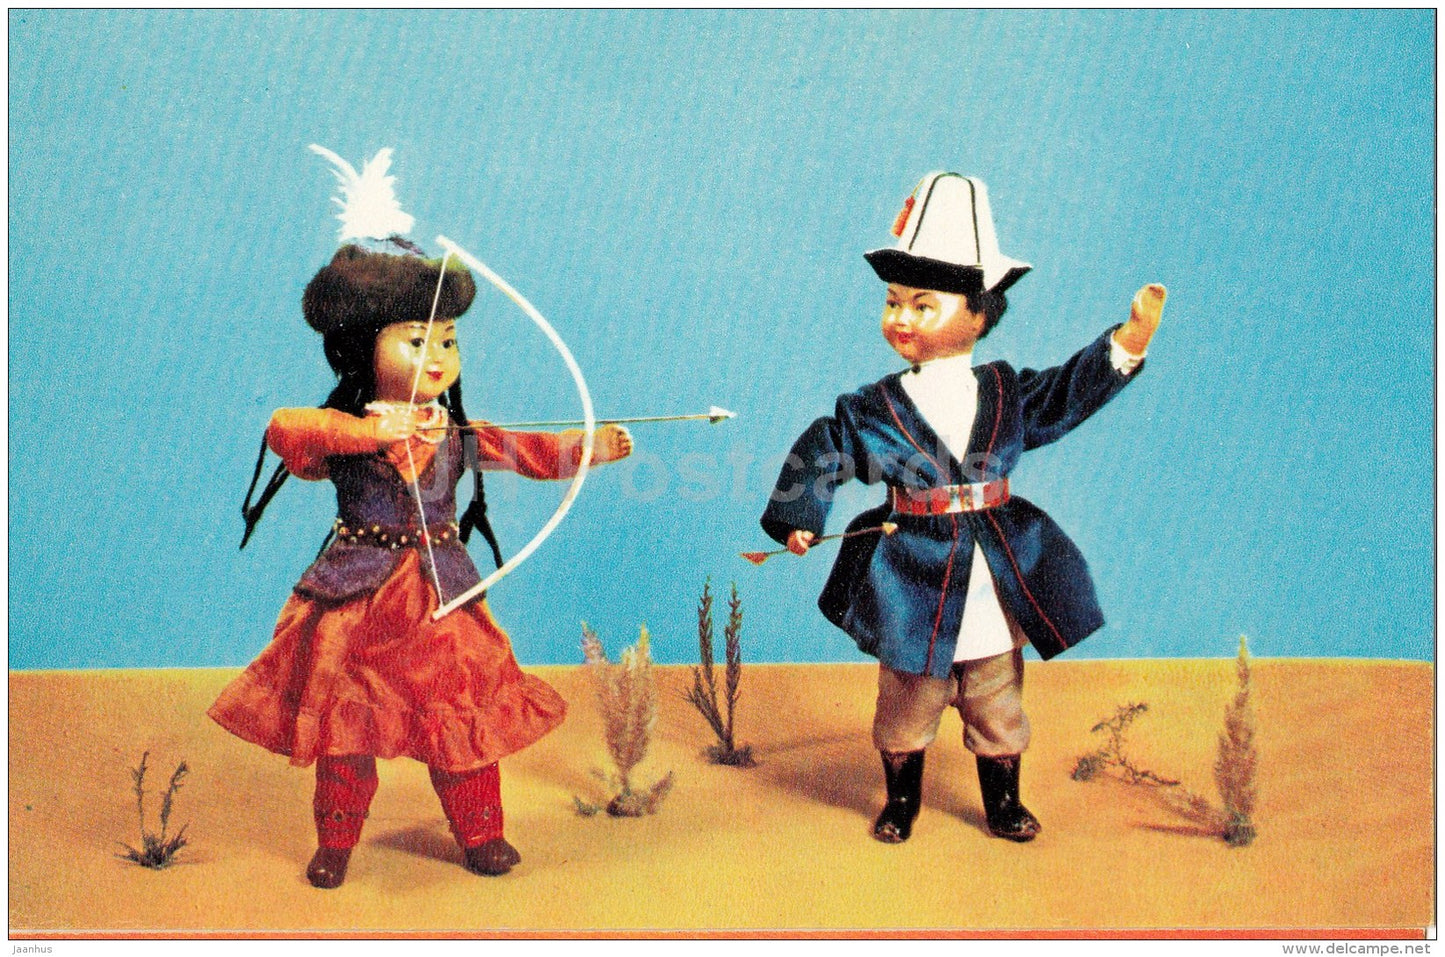 Archery - bow - dolls in Kyrgystan national costumes - 1967 - Russia USSR - unused - JH Postcards